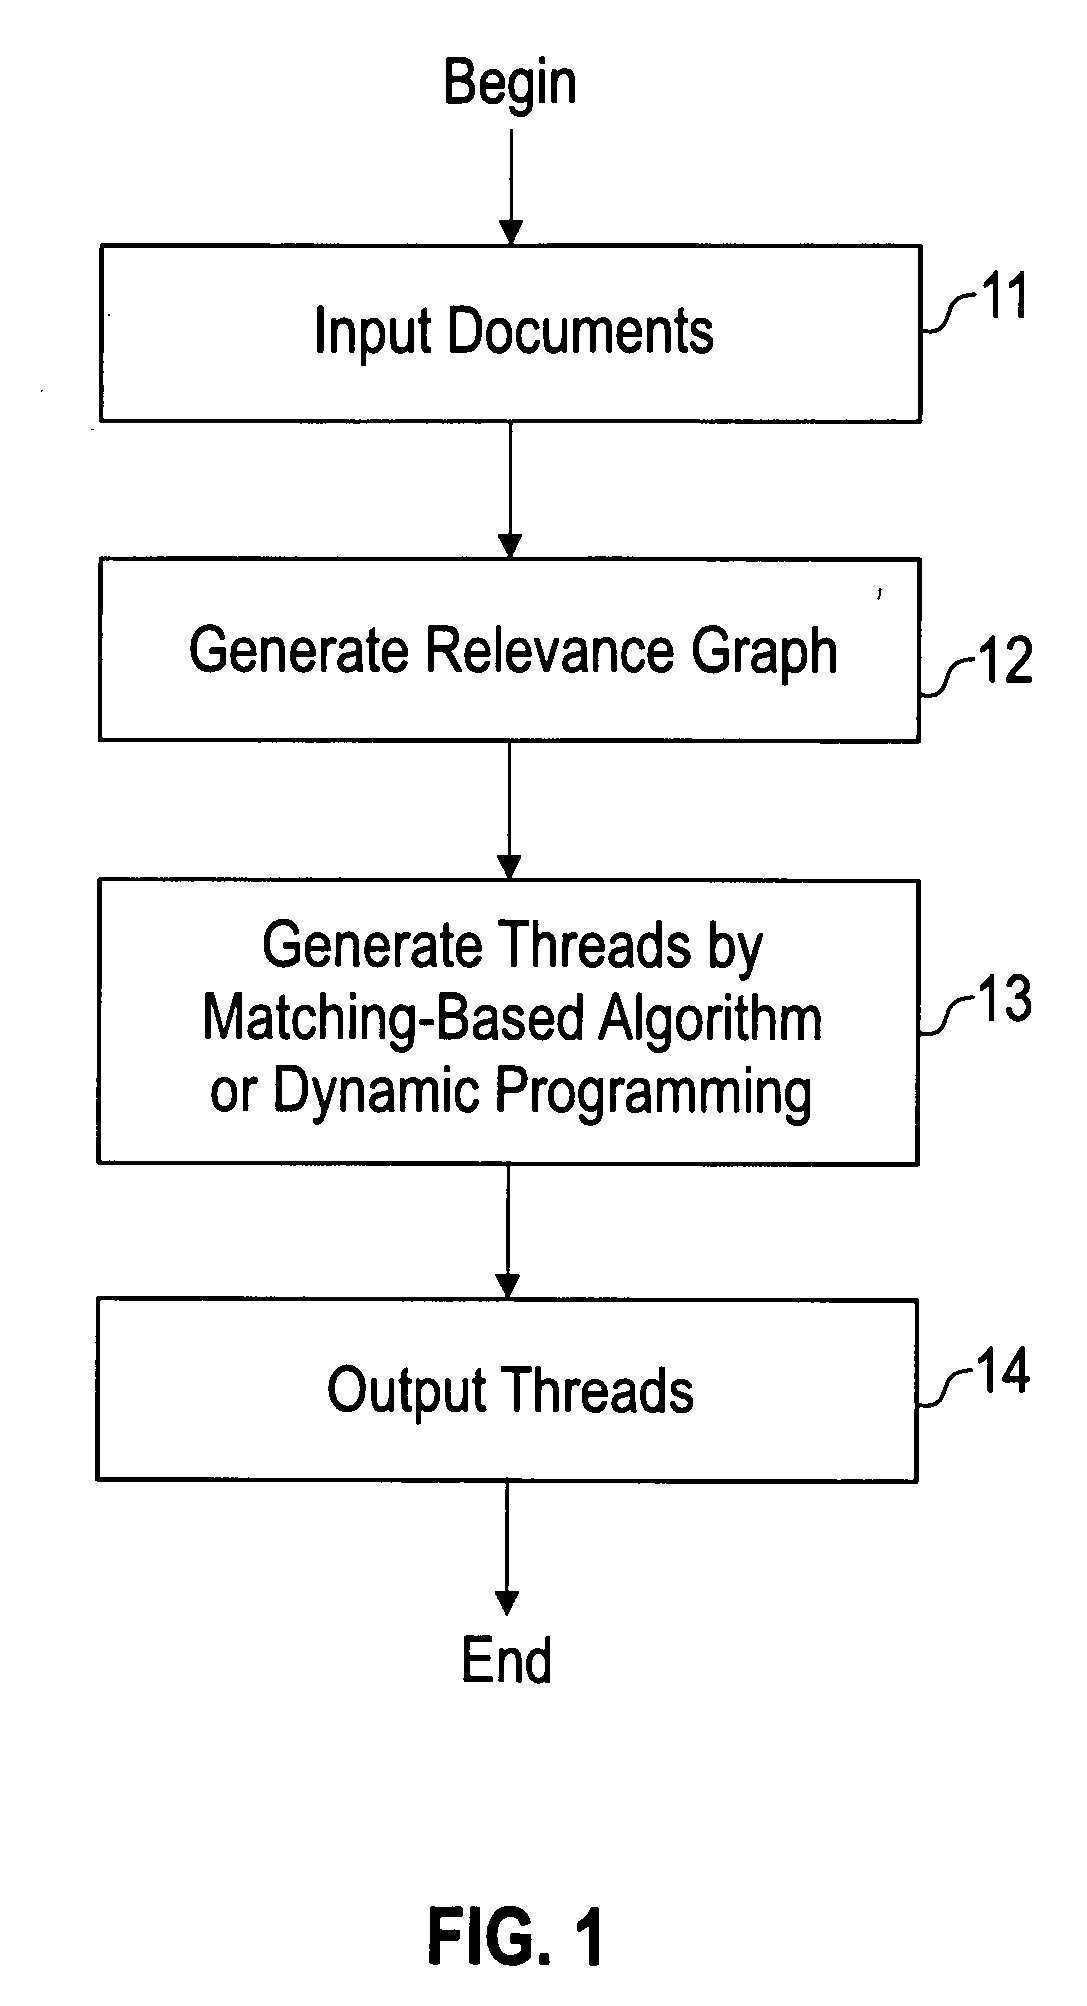 Method and system for generating threads of documents